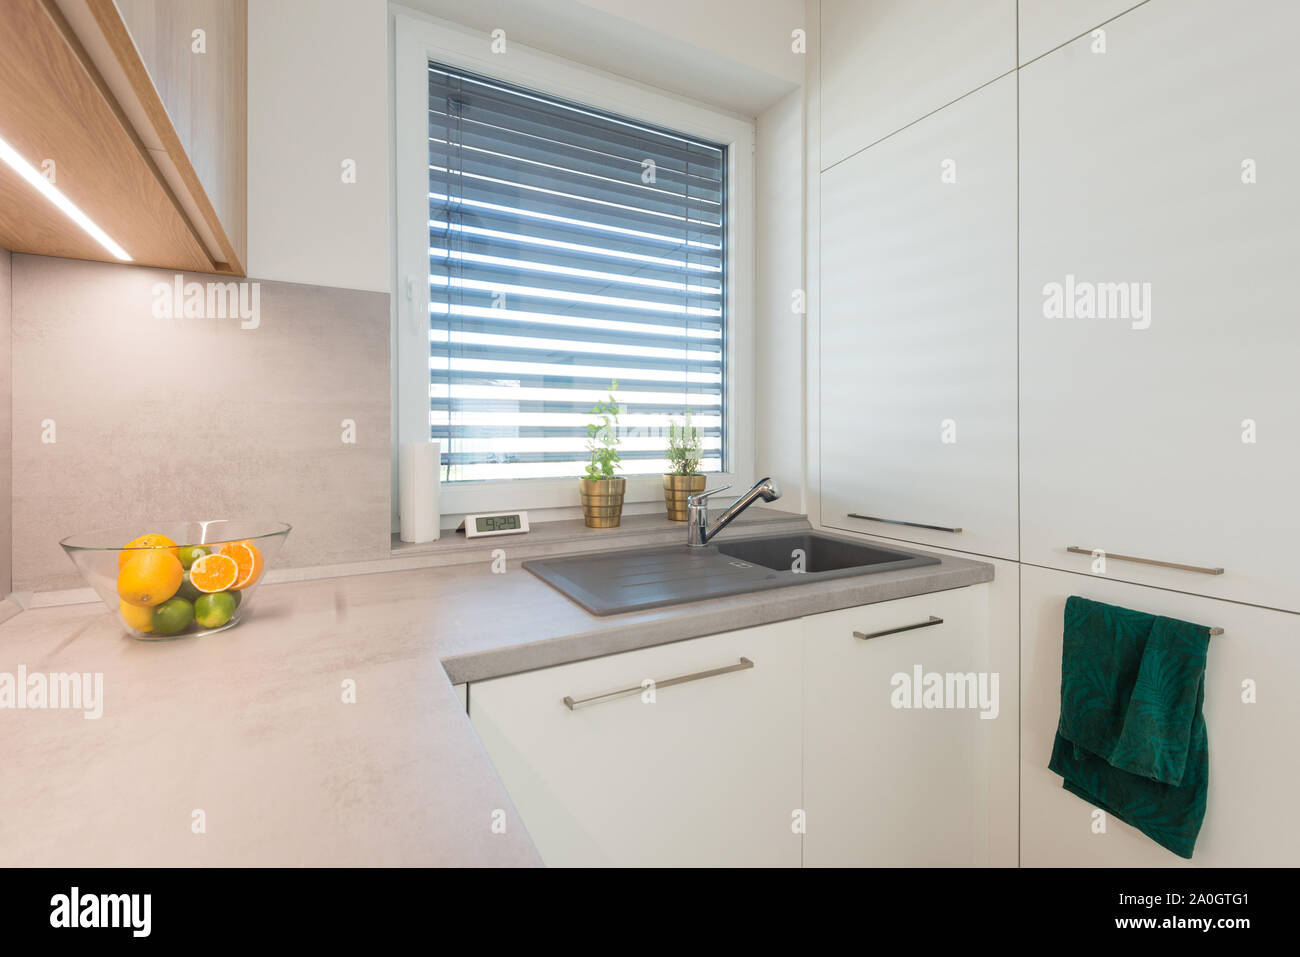 Sink and worktop of contemporary kitchen Stock Photo